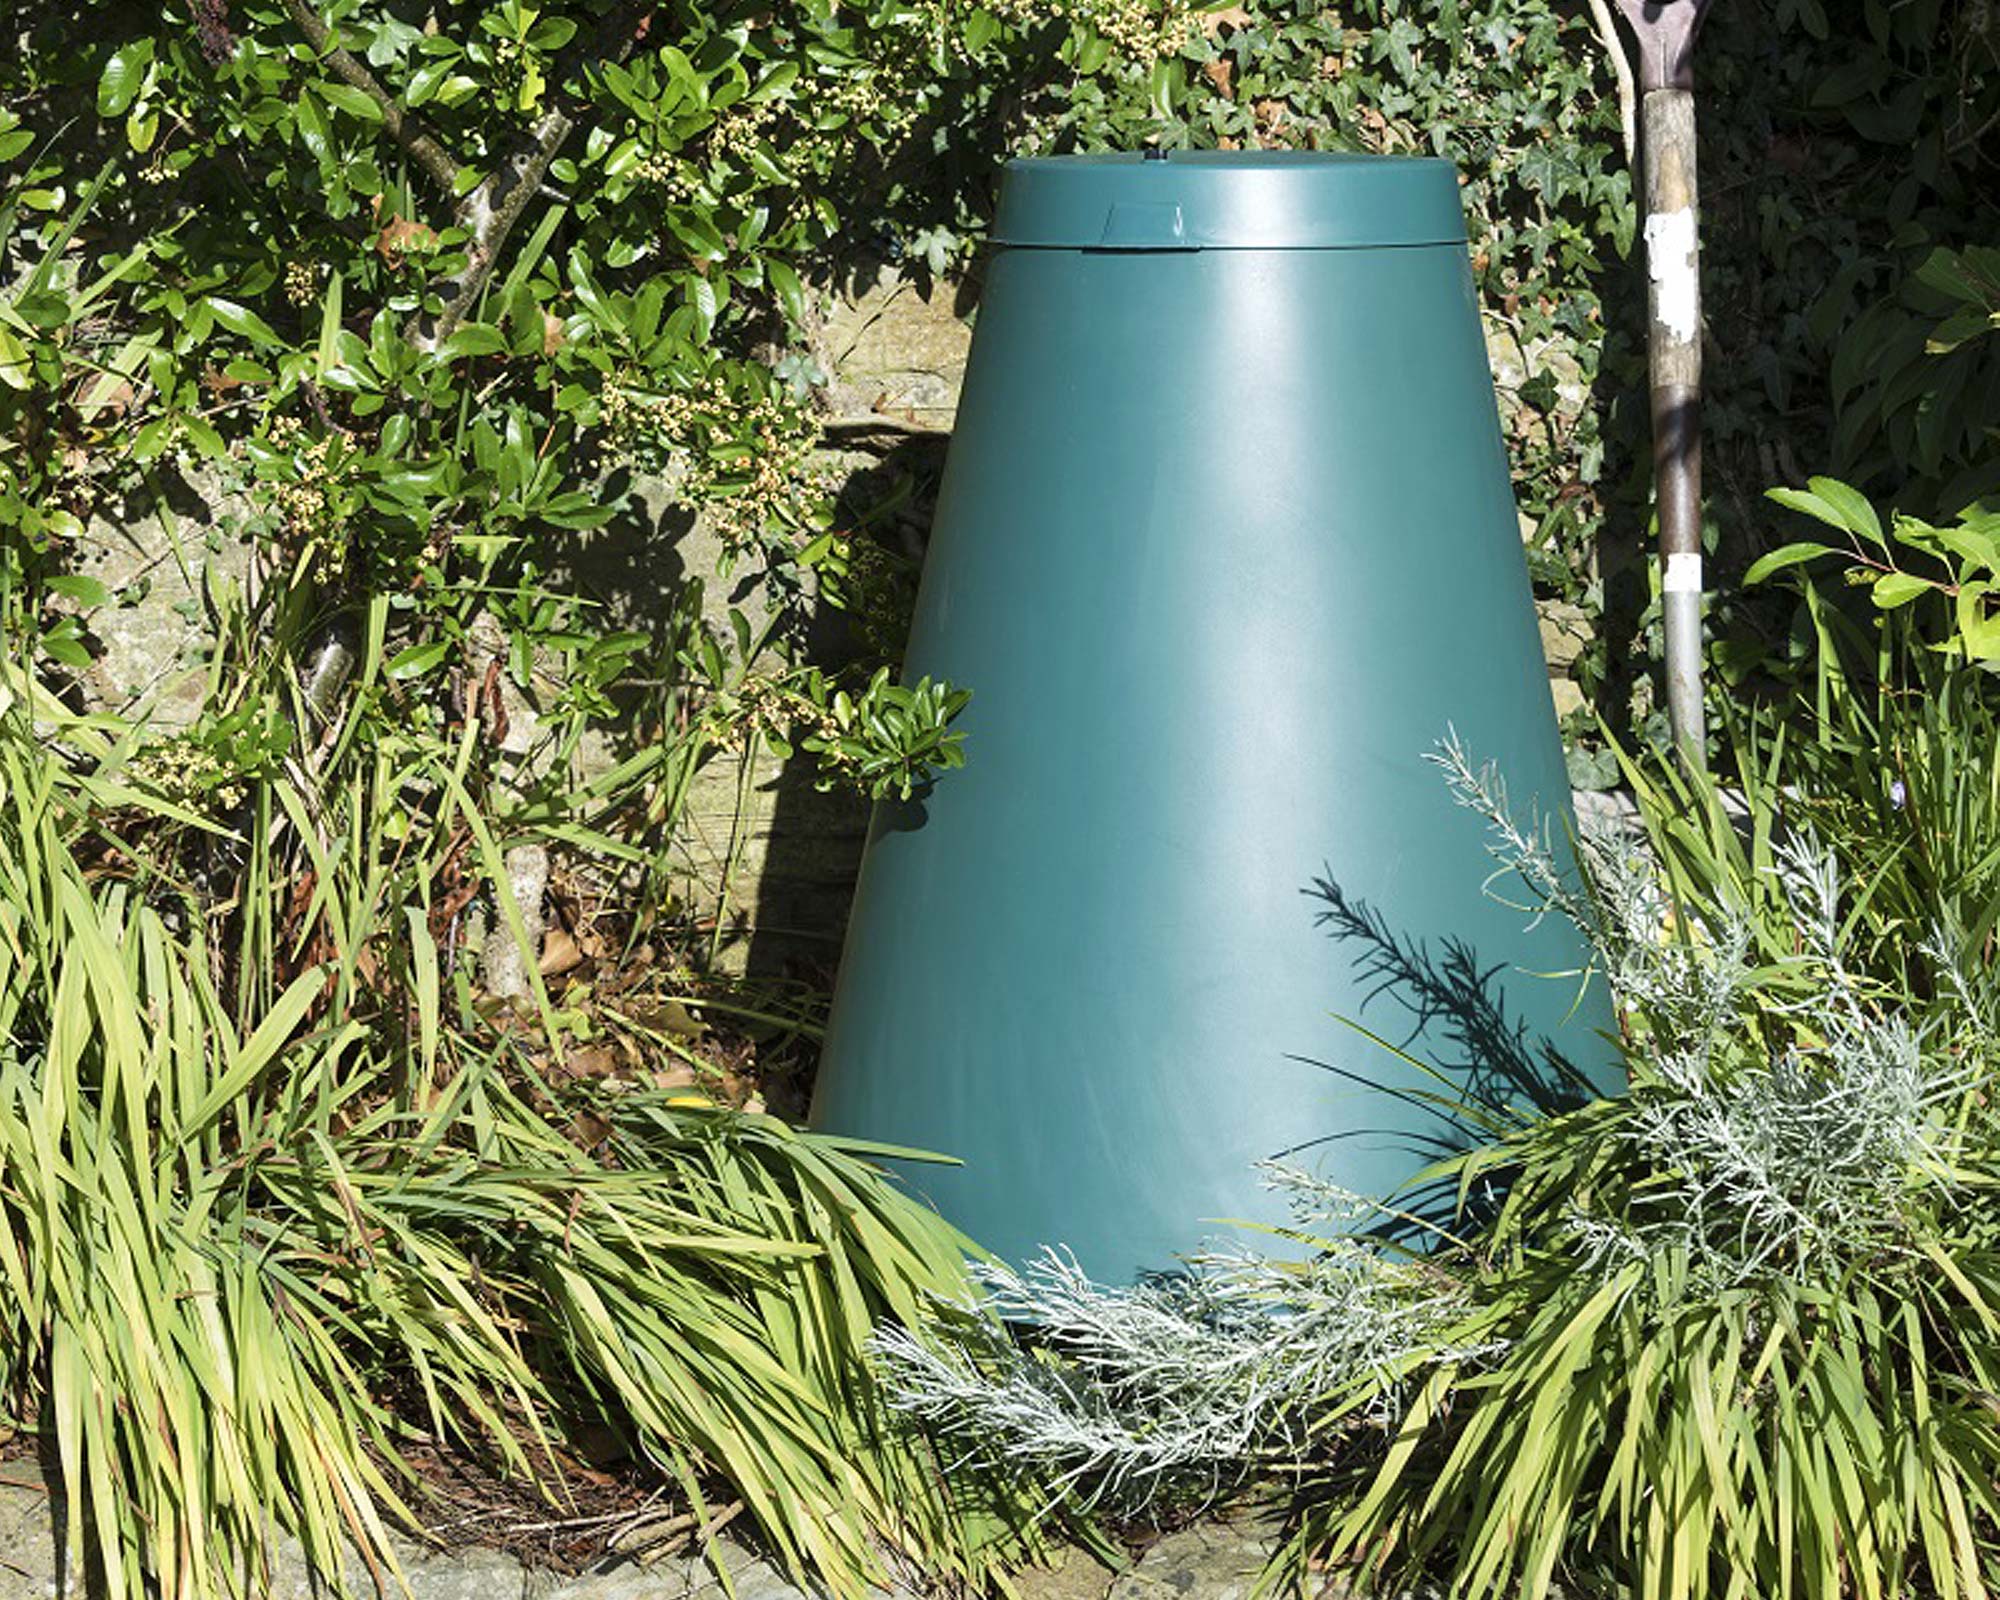 In the Garden - Green Cone Outdoor Food Digestion System